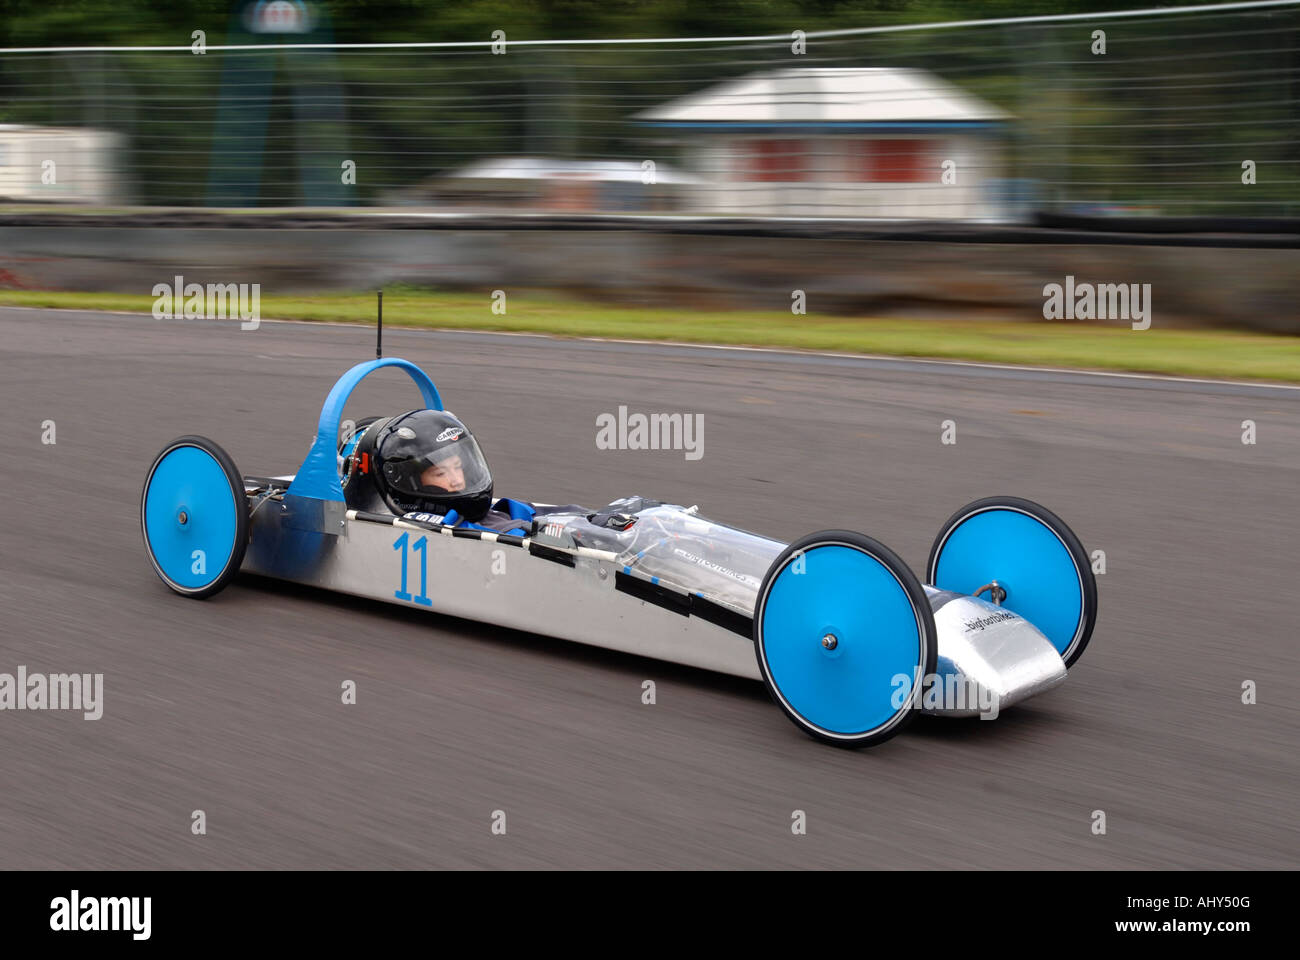 GREENPOWER ELECTRIC CAR RACING FOR SCHOOLS AT THE CASTLE COMBE CIRCUIT WILTSHIRE UK Stock Photo